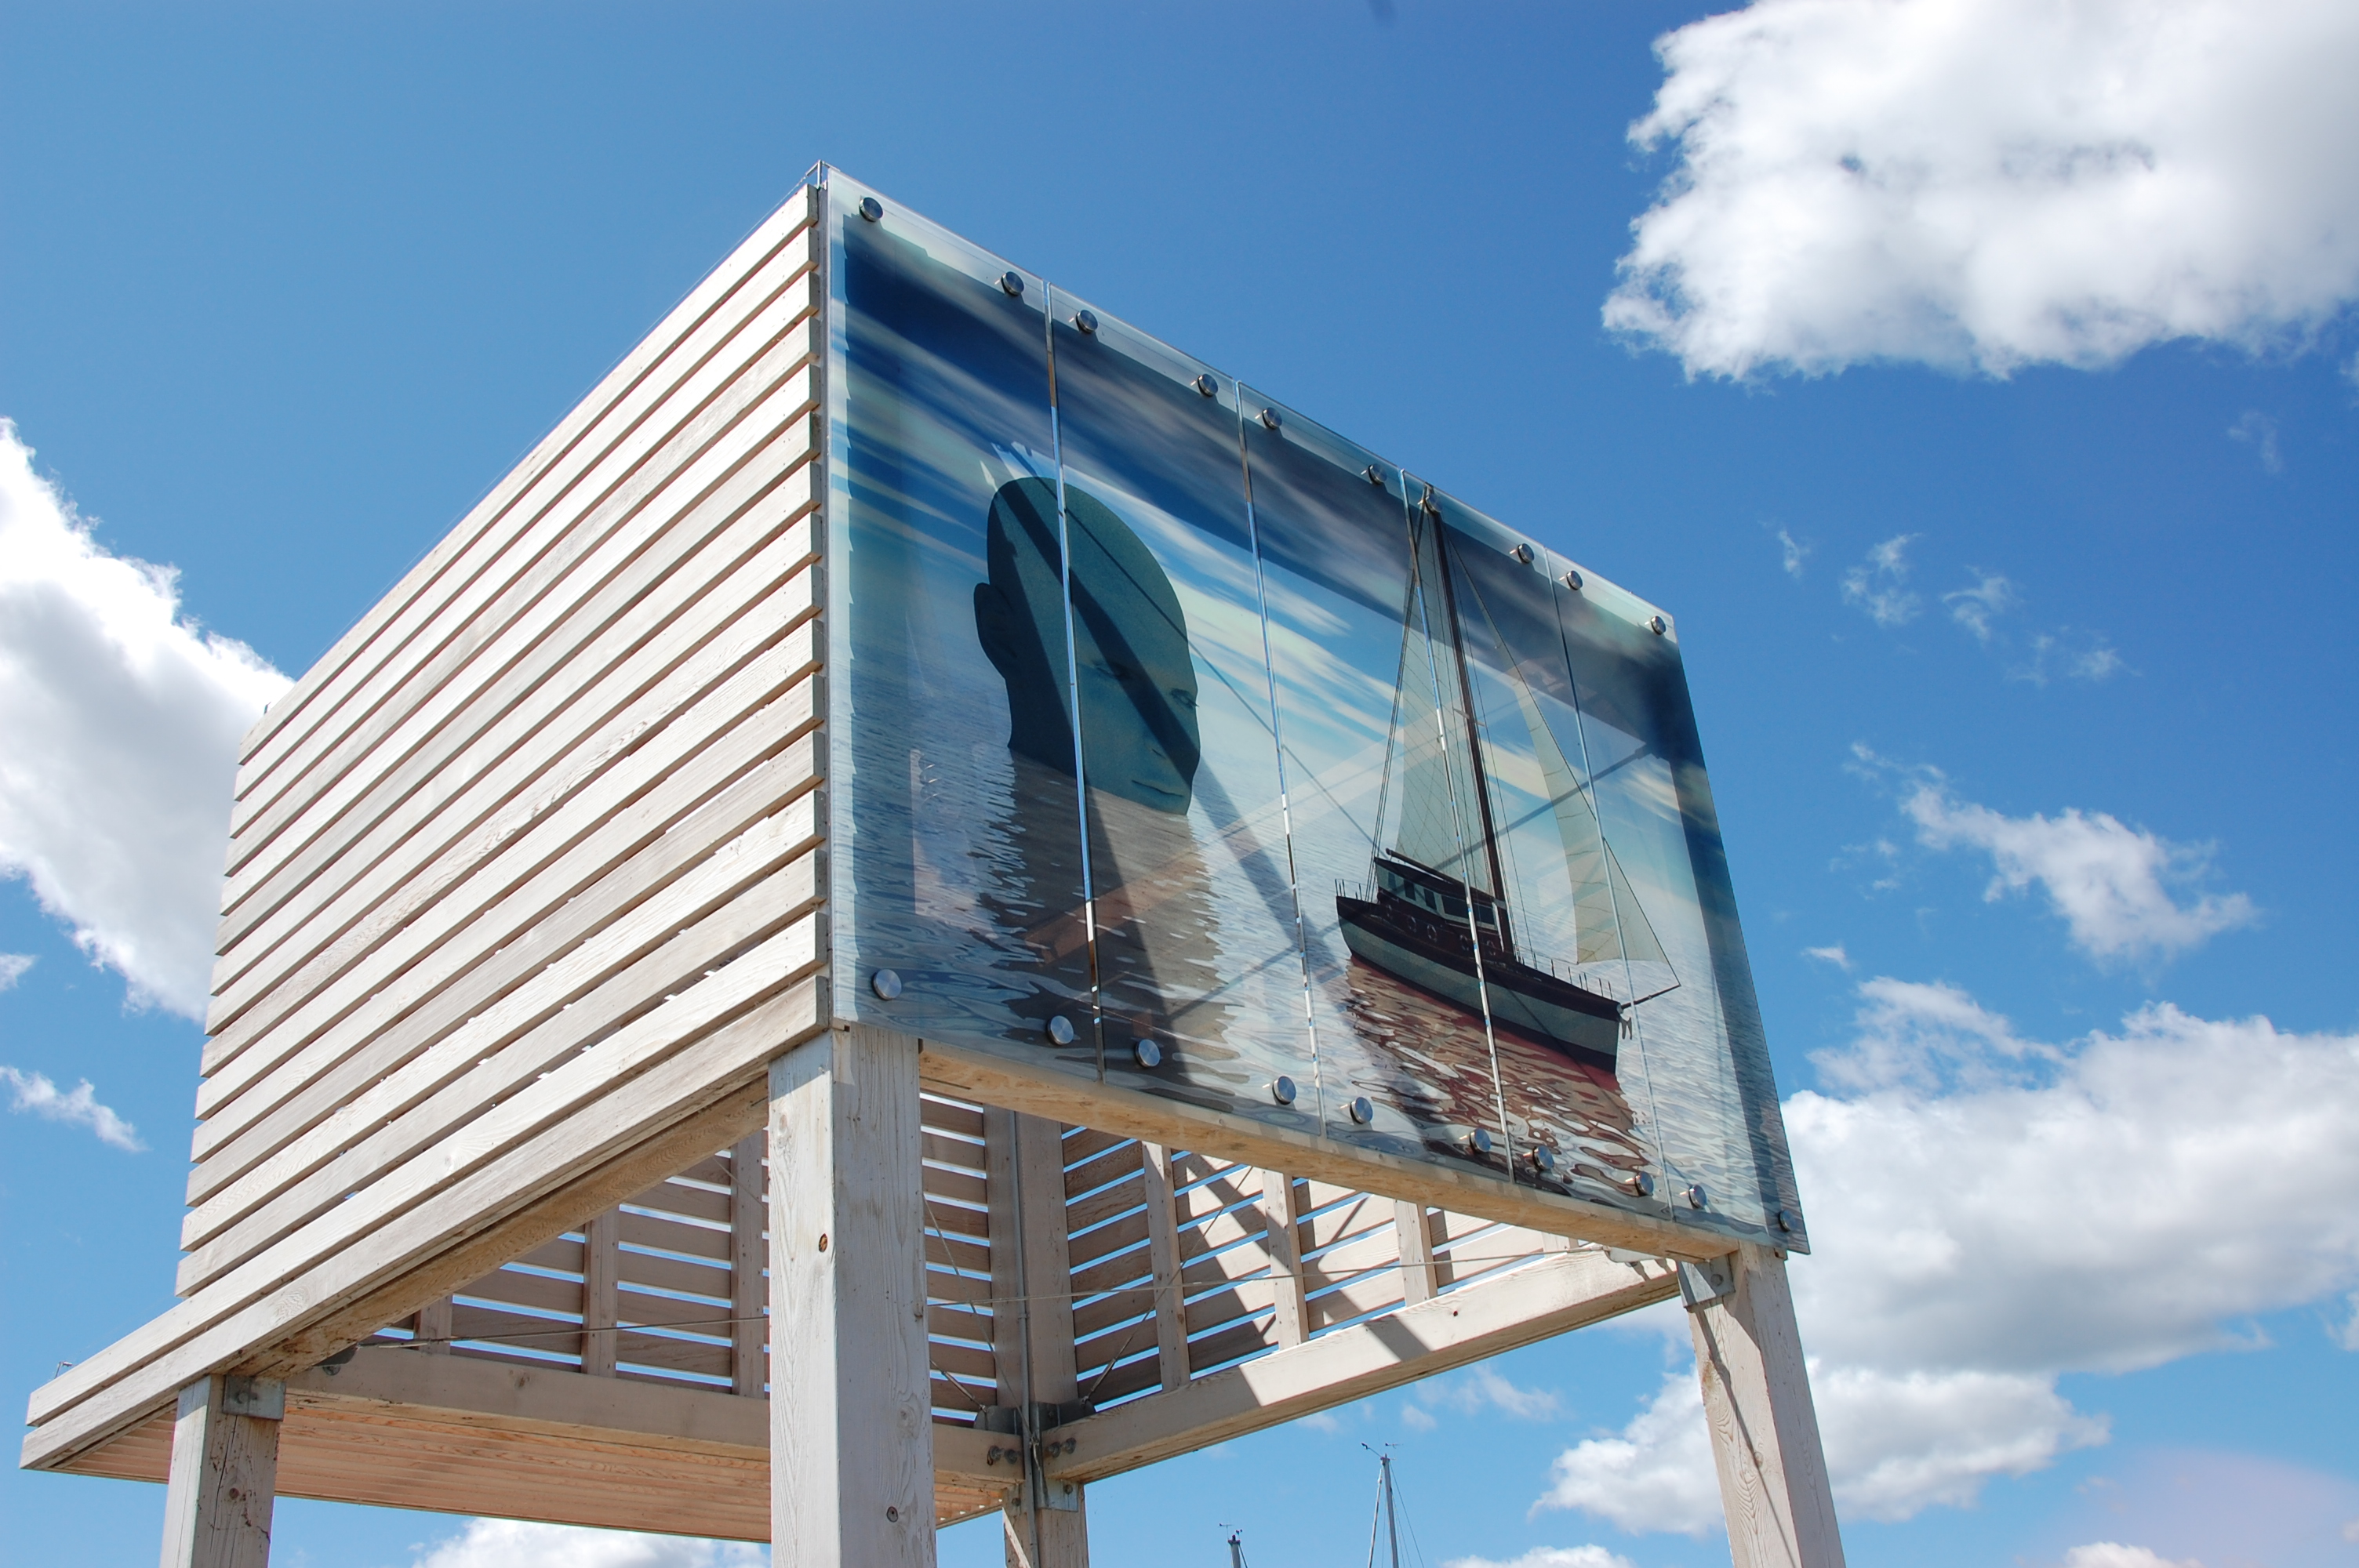 "Ulysses" by Mark Nisenholt, Lantern Art at Prince Arthur's Landing; a large wooden slat box set on high vertical beams, with the blue sky in the background. On the front of the box is a painting of a sailboat on the bay with the silhouette of a large human head rising out of the water. 